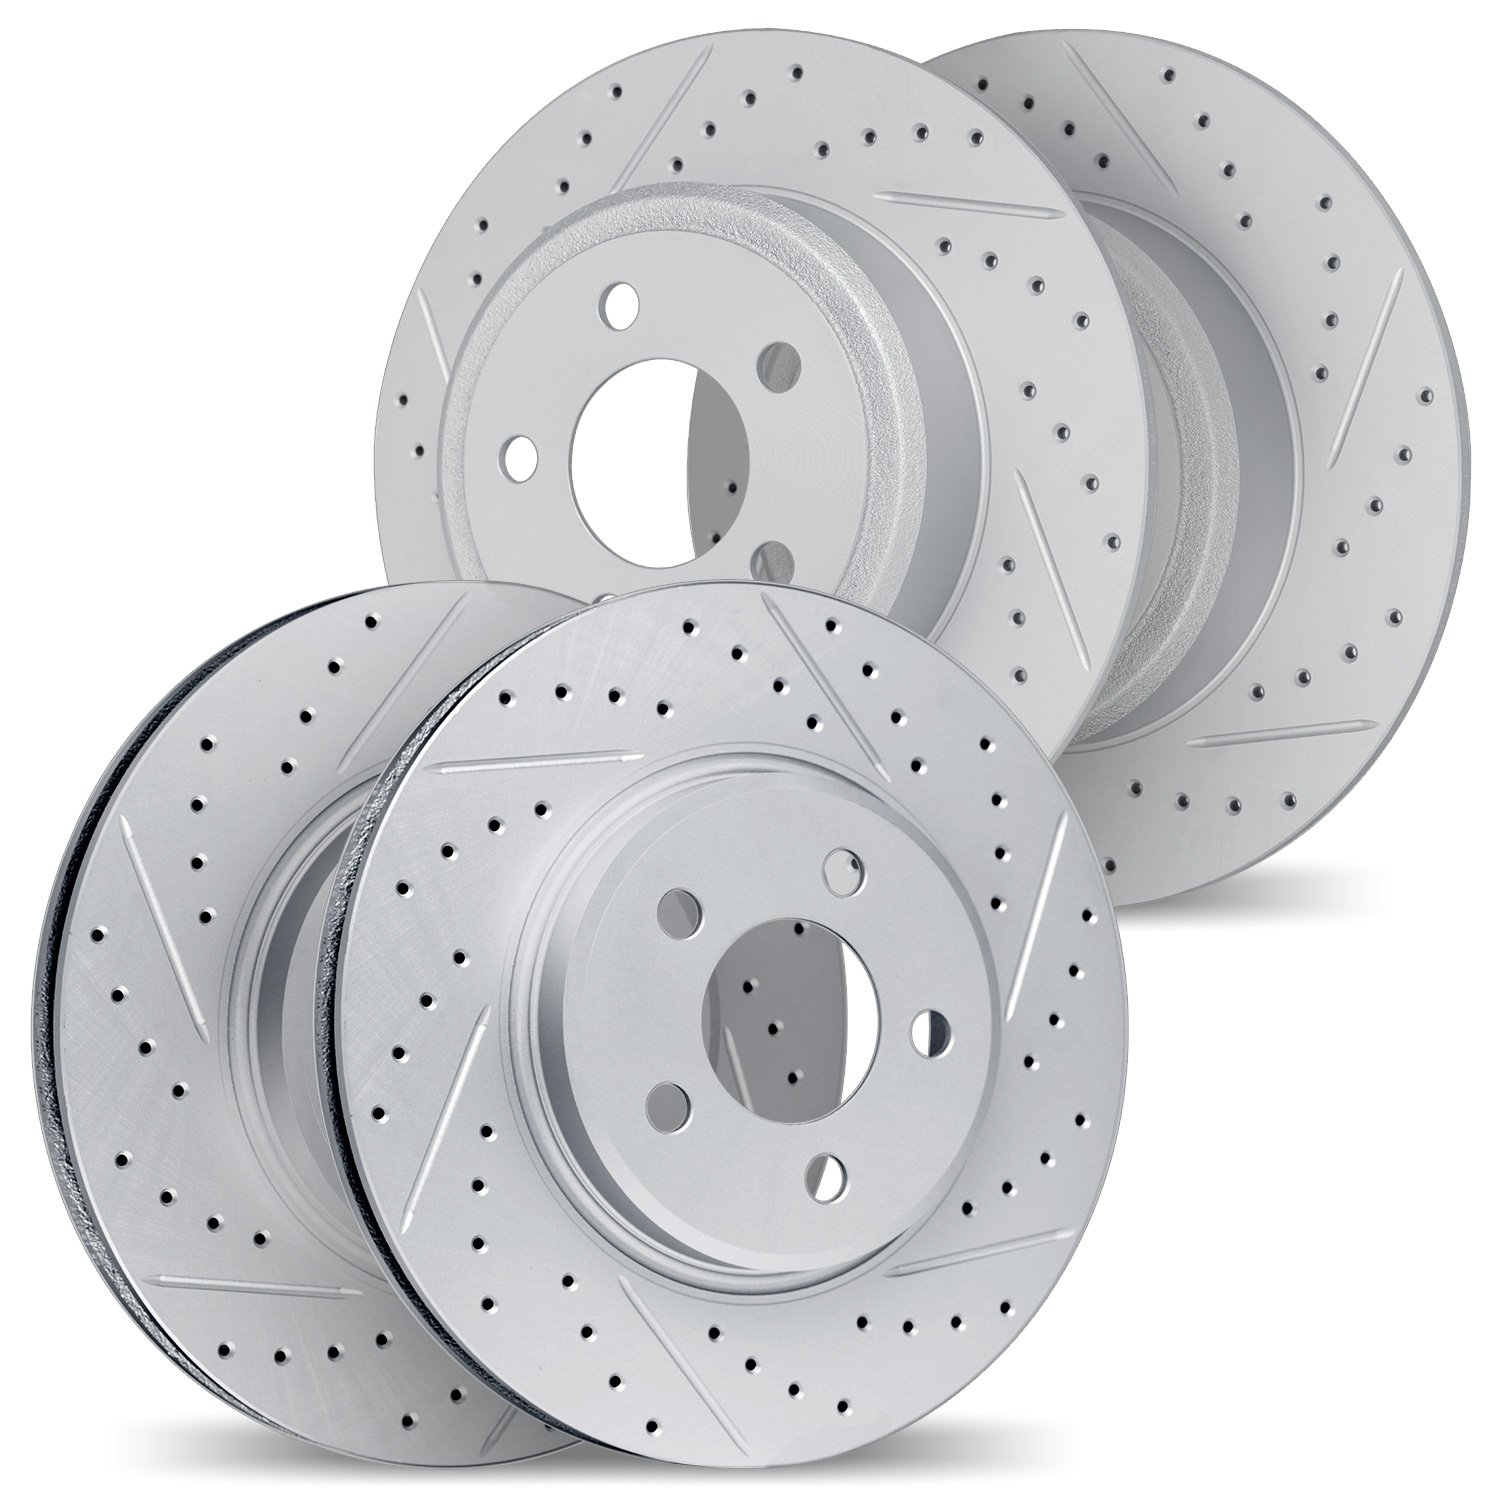 2004-03010 Geoperformance Drilled/Slotted Brake Rotors, 2006-2009 Kia/Hyundai/Genesis, Position: Front and Rear